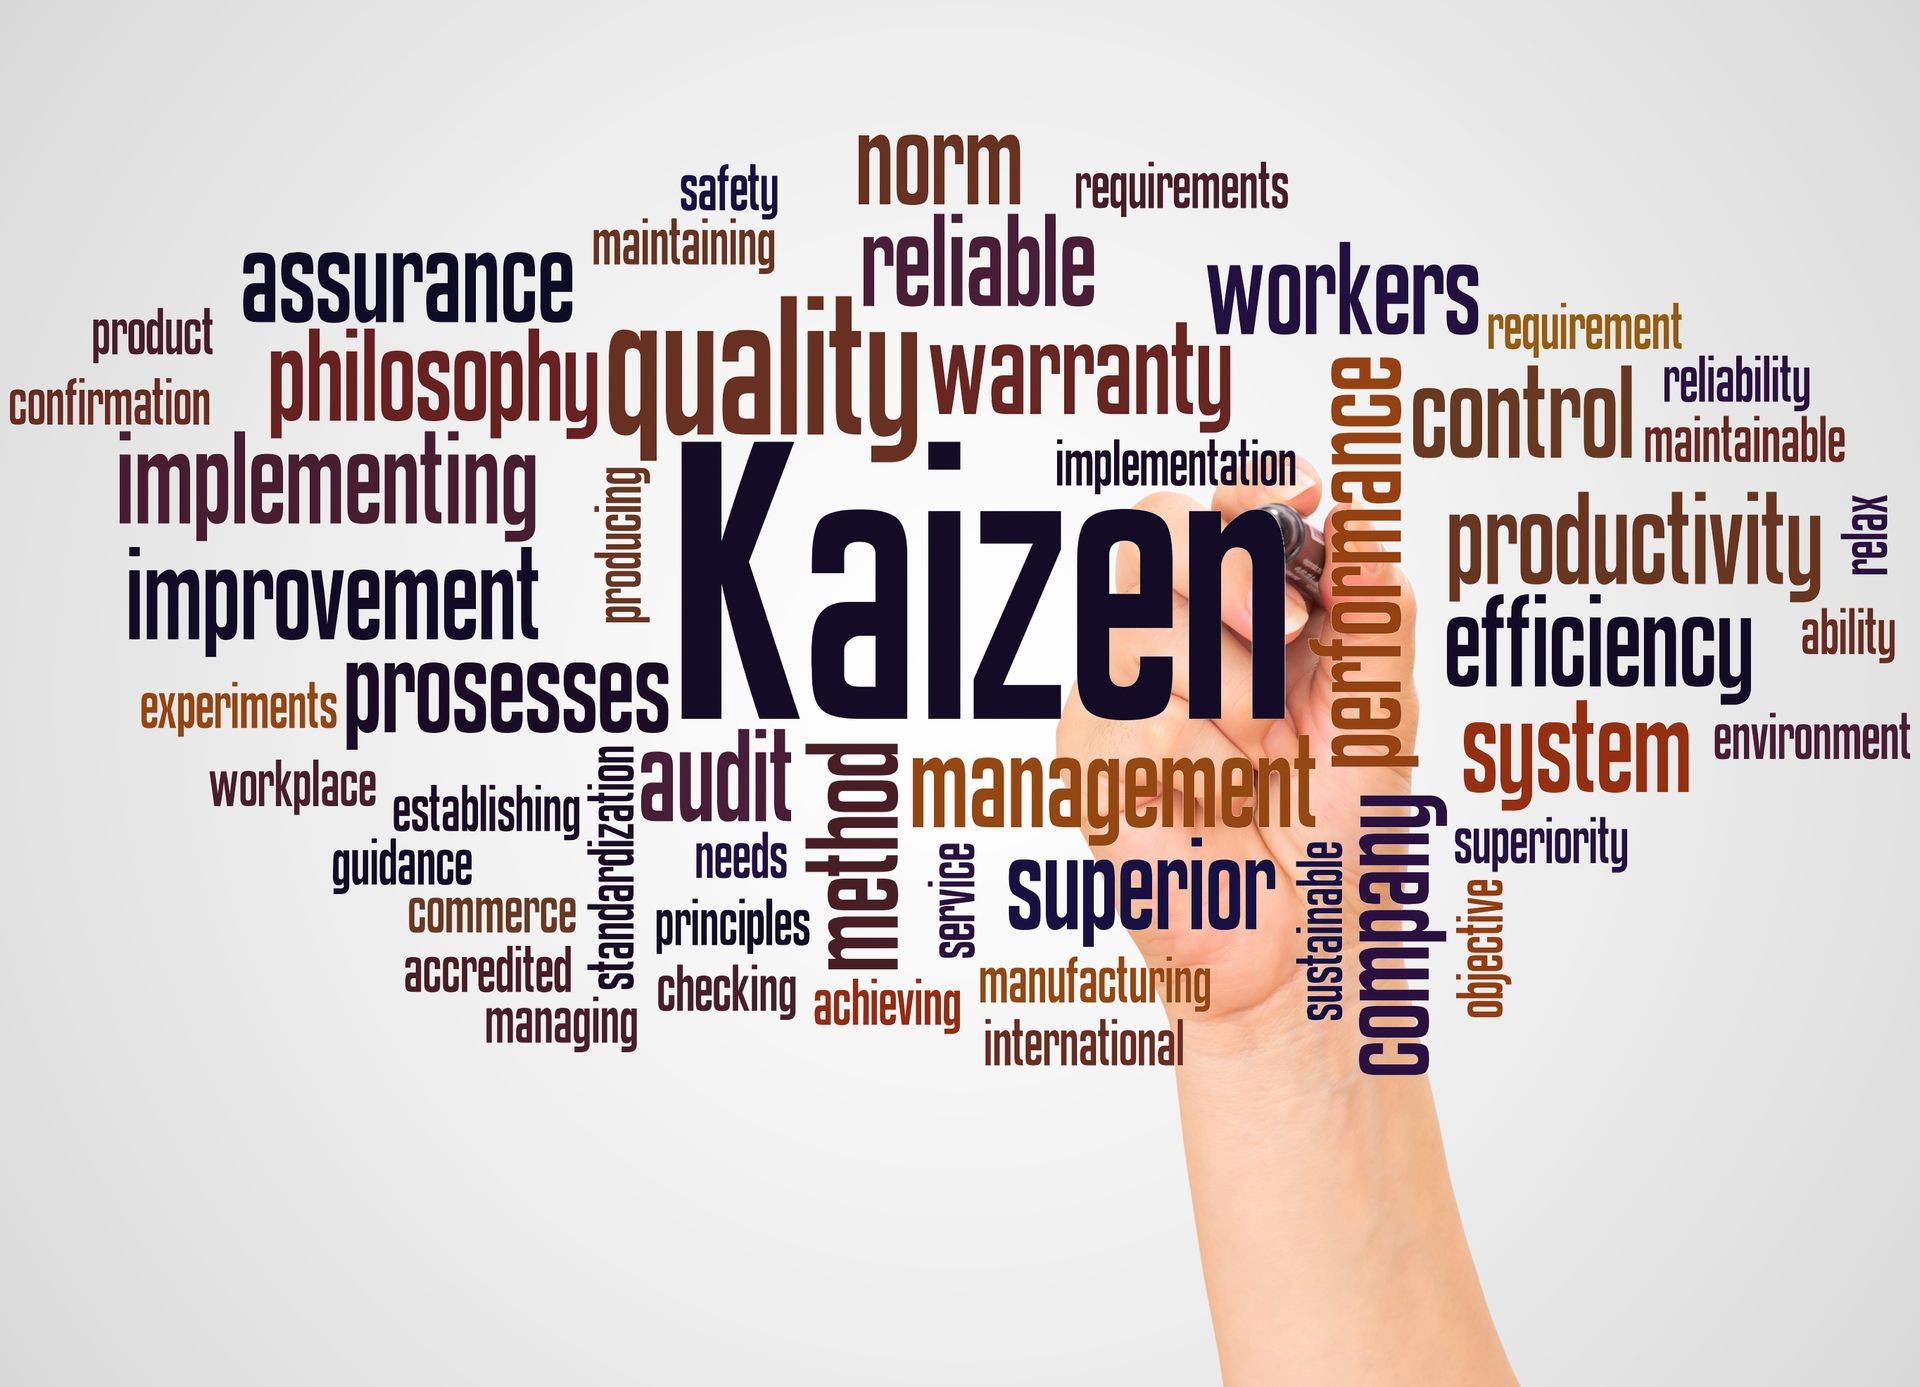 Kaizen - continuous improvement process, word cloud and hand with marker concept on white background.